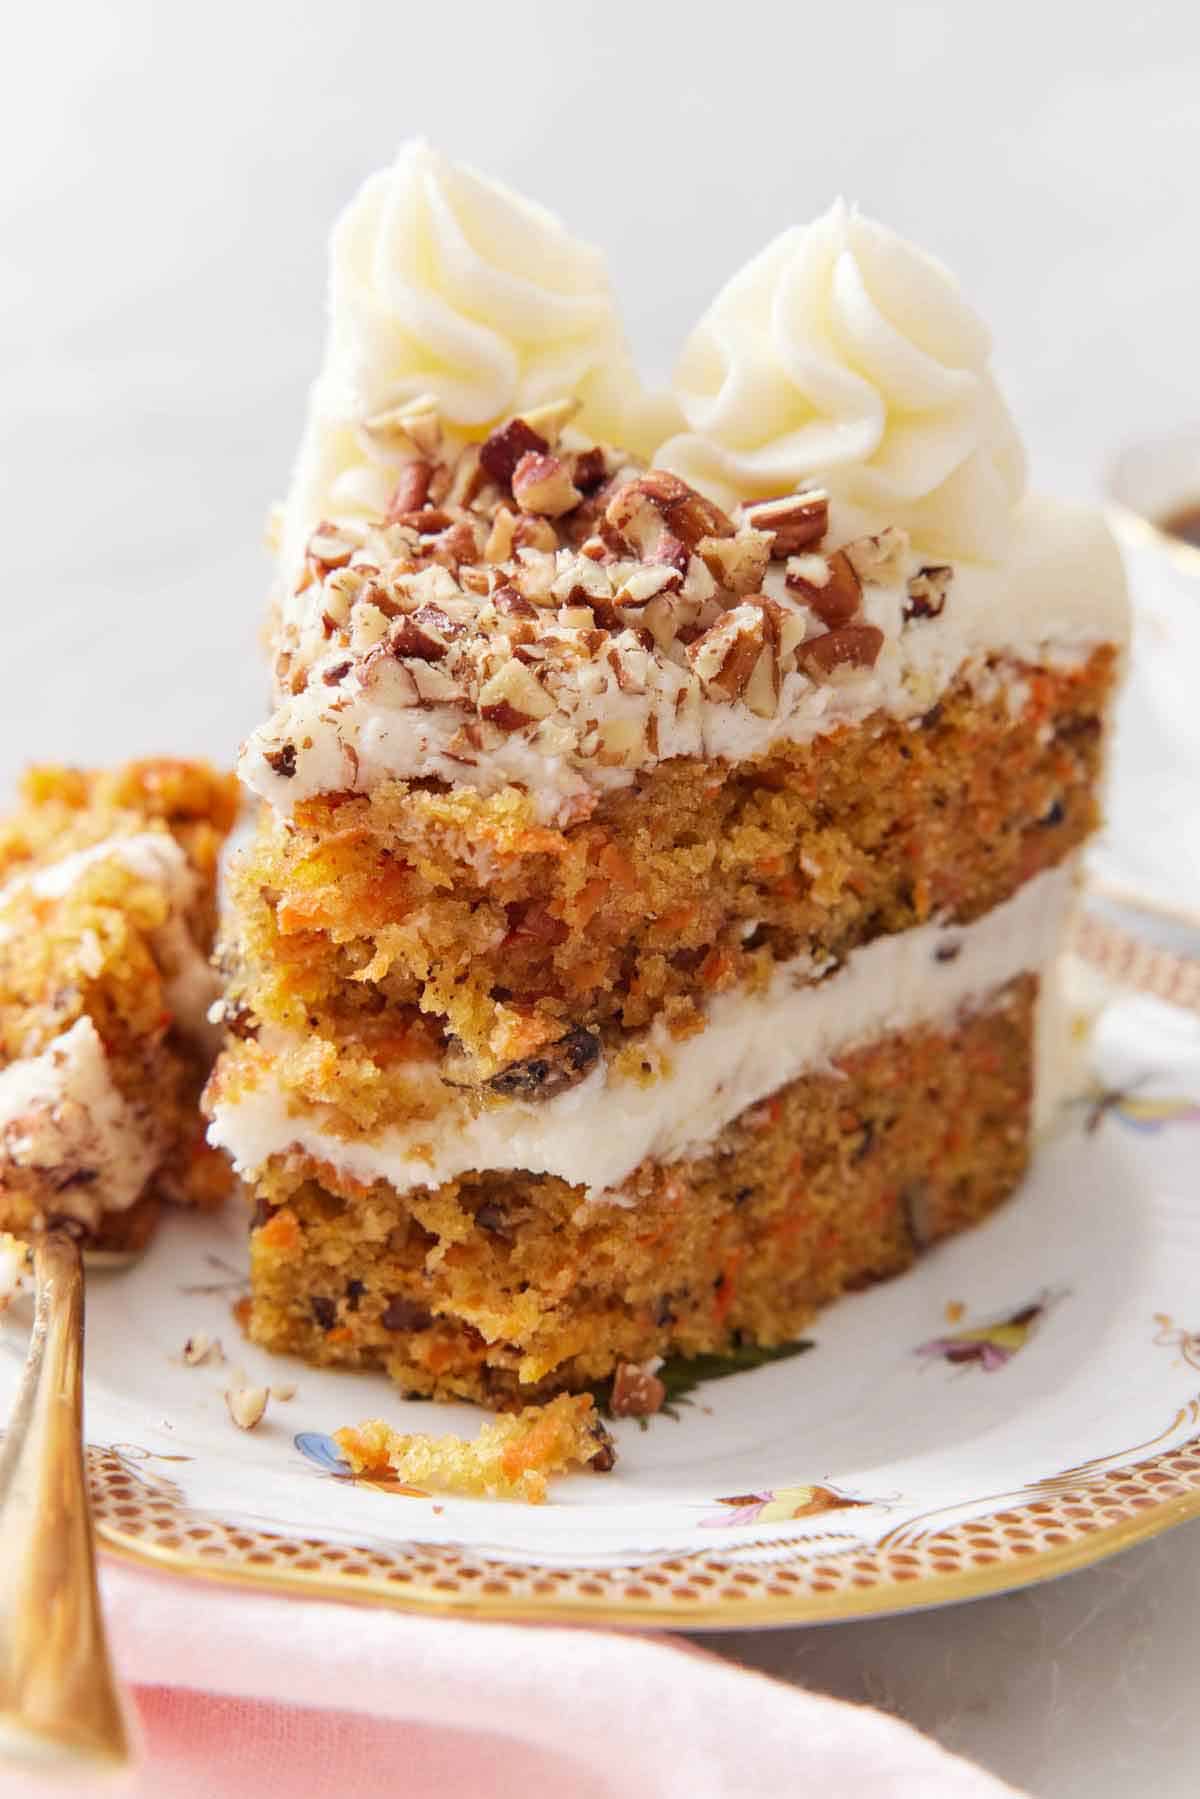 A slice of carrot cake on a plate with the tip on a fork beside it.